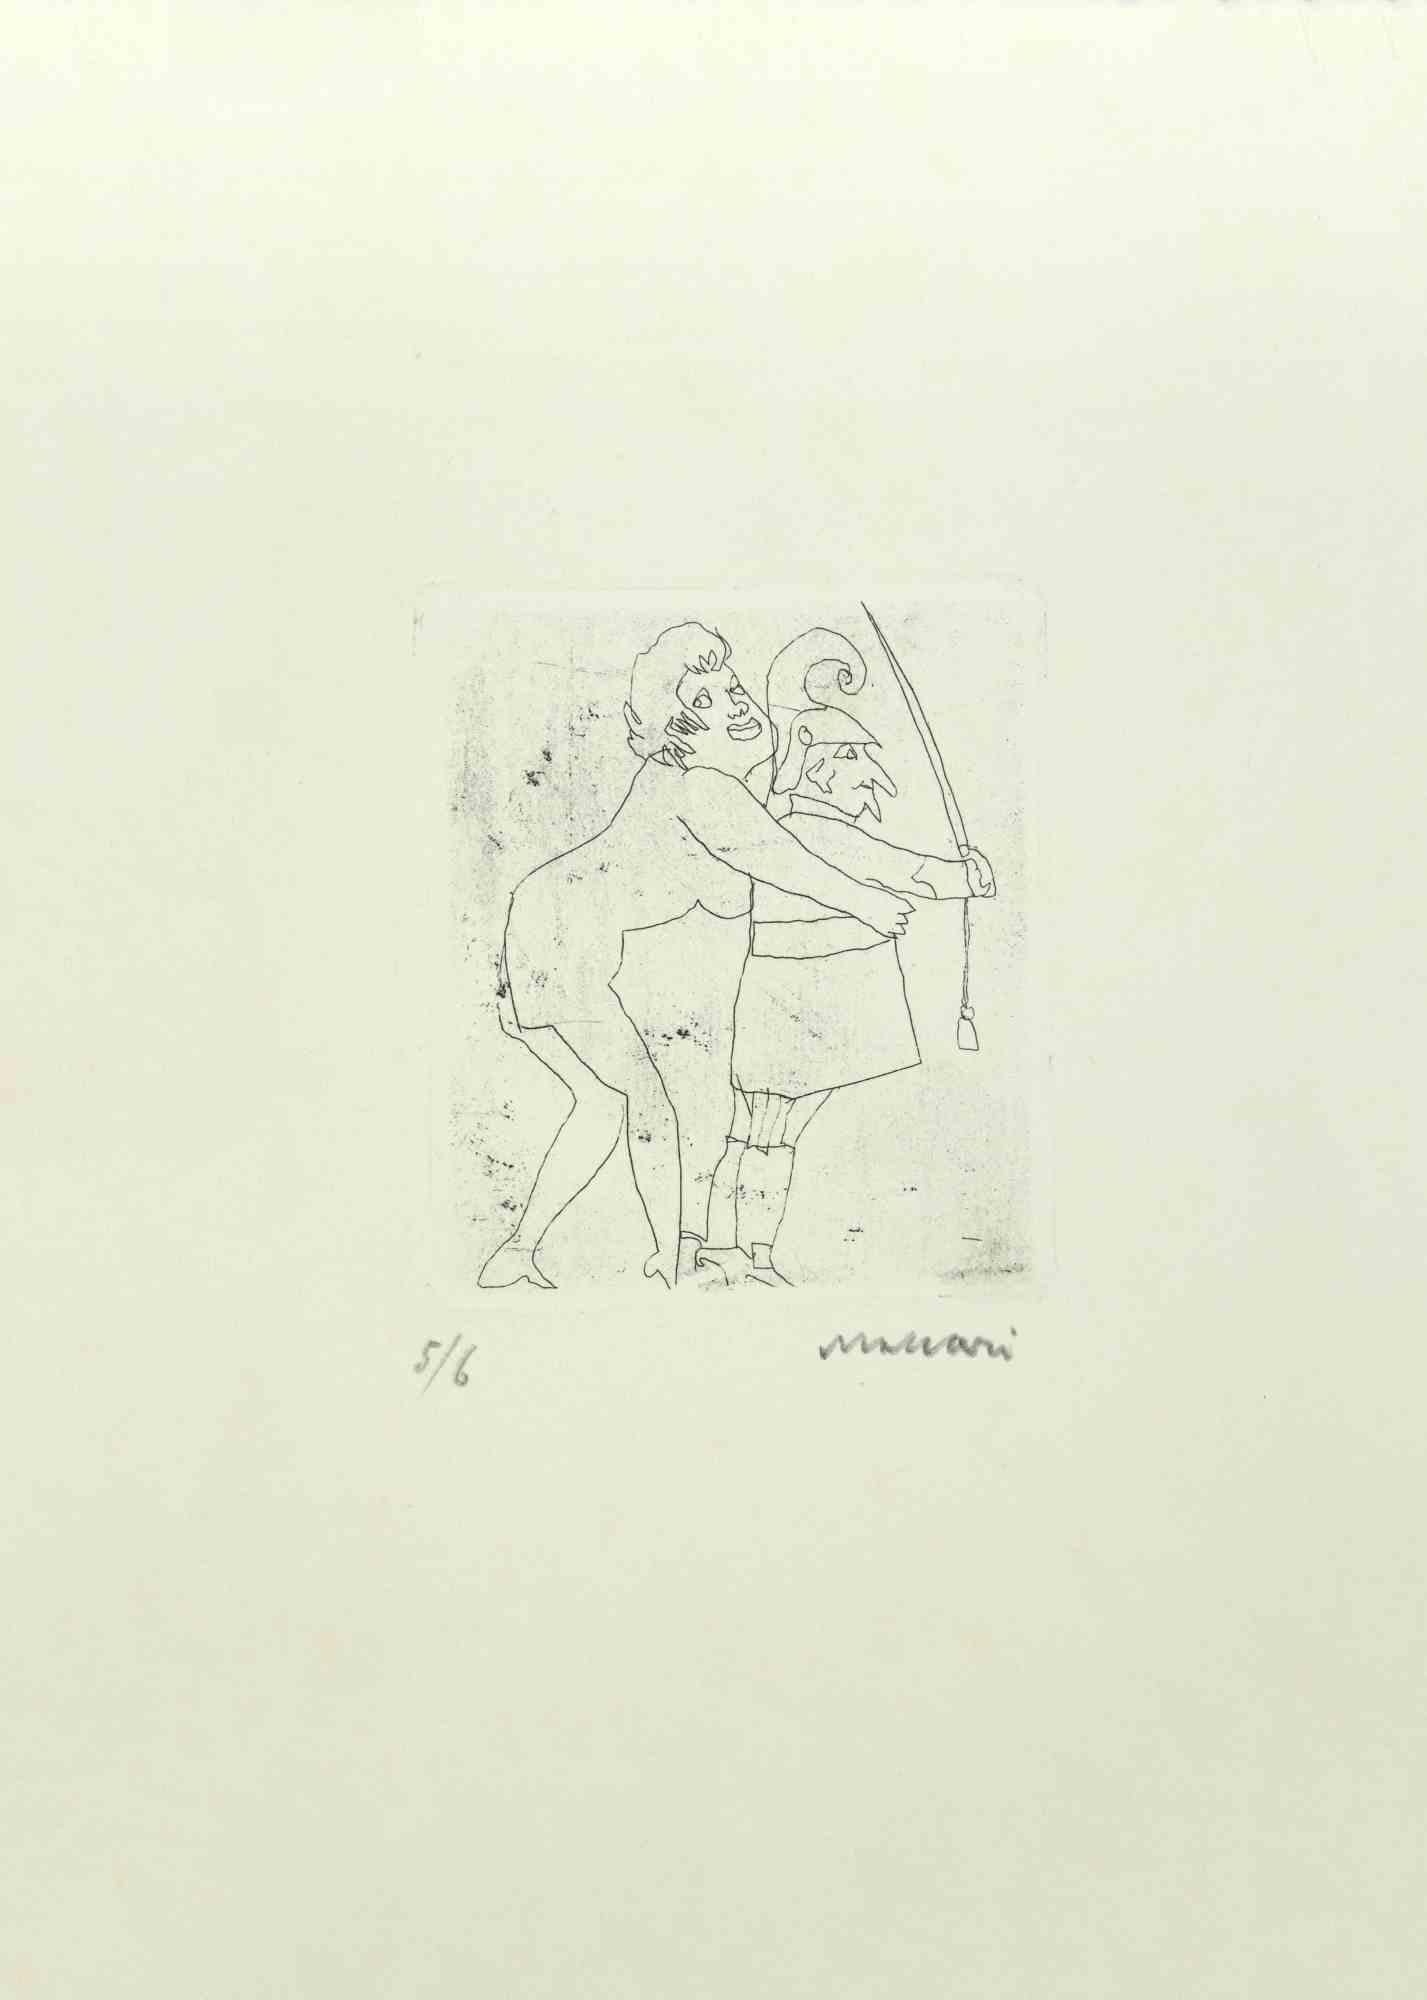 Seduction is an Etching and Drypoint realized by Mino Maccari in the Mid-20th Century.

Hand-signed in the lower right part.

Numbered. Edition,5/6.

Good conditions.

Mino Maccari (Siena, 1924-Rome, June 16, 1989) was an Italian writer, painter,